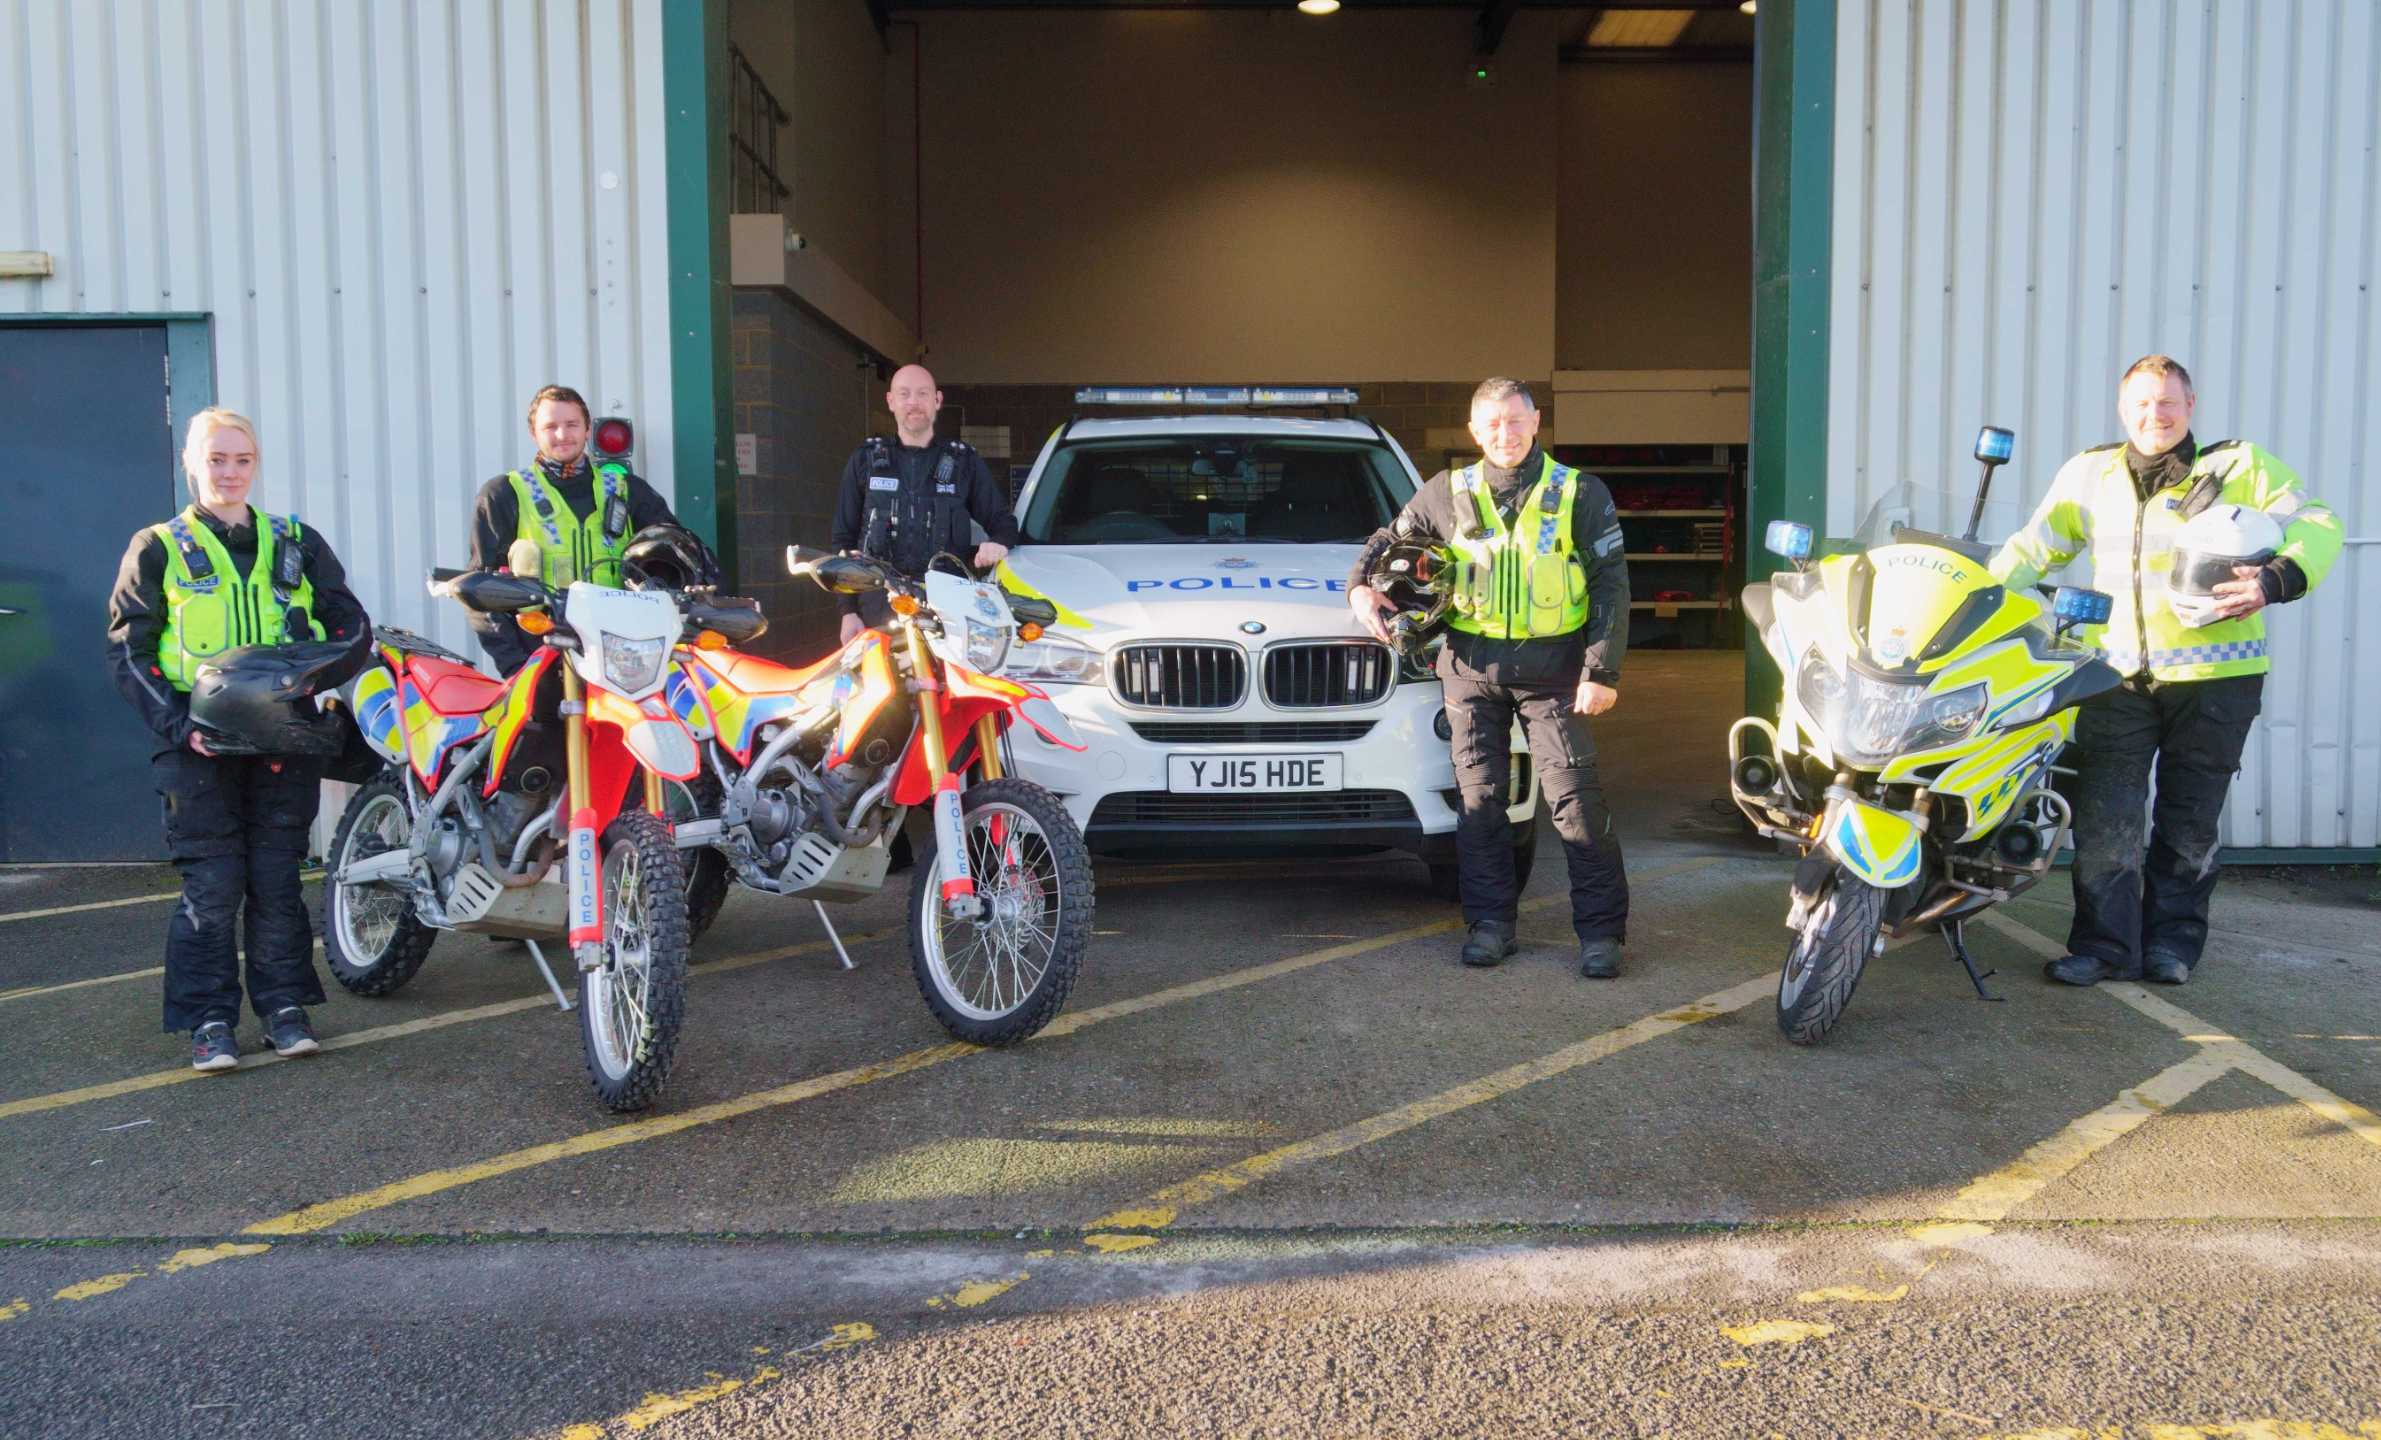 North Yorkshire Police’s off-road motorcycle team of specially-trained officers